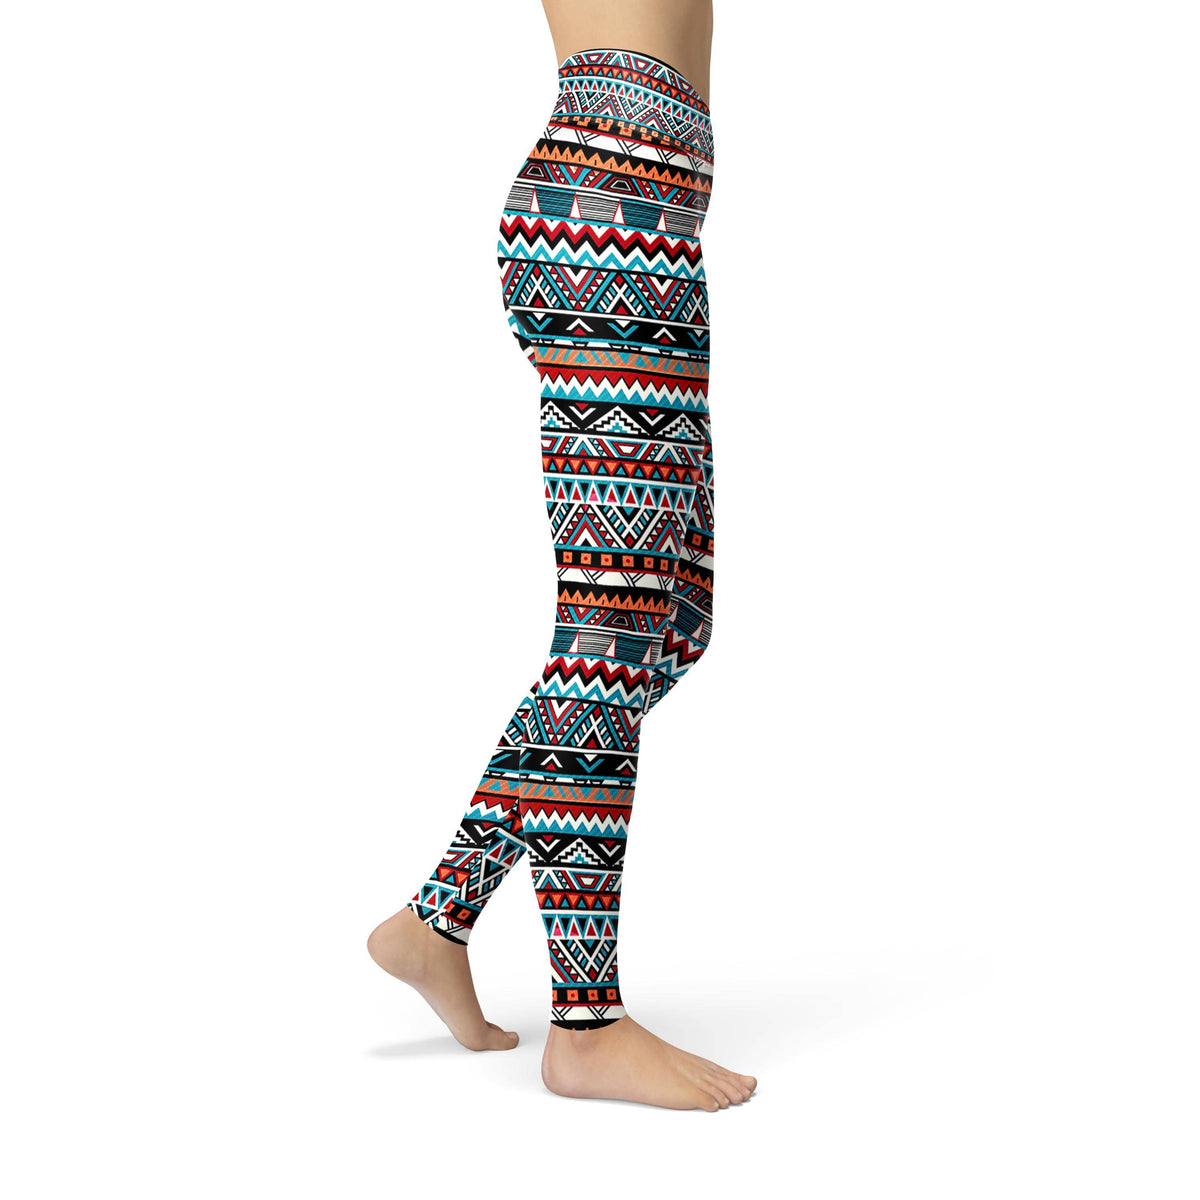 12 Reasons You Shouldn't Invest in bohemian yoga pants by